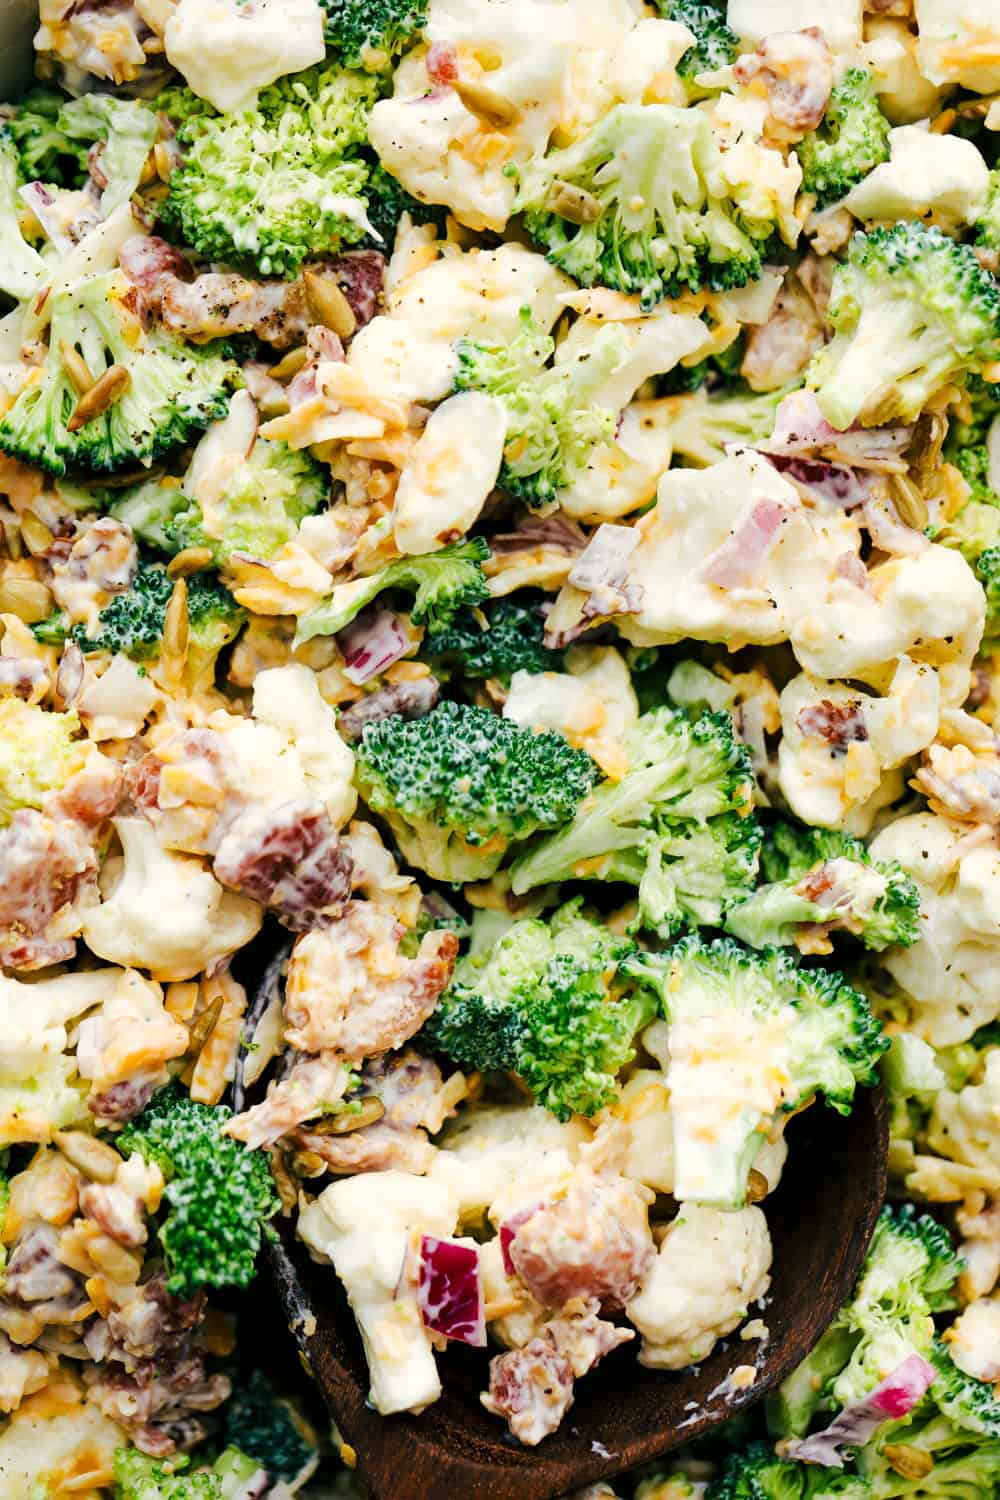 Cauliflower broccoli salad photo with shredded cheese and bacon shown throughout. 